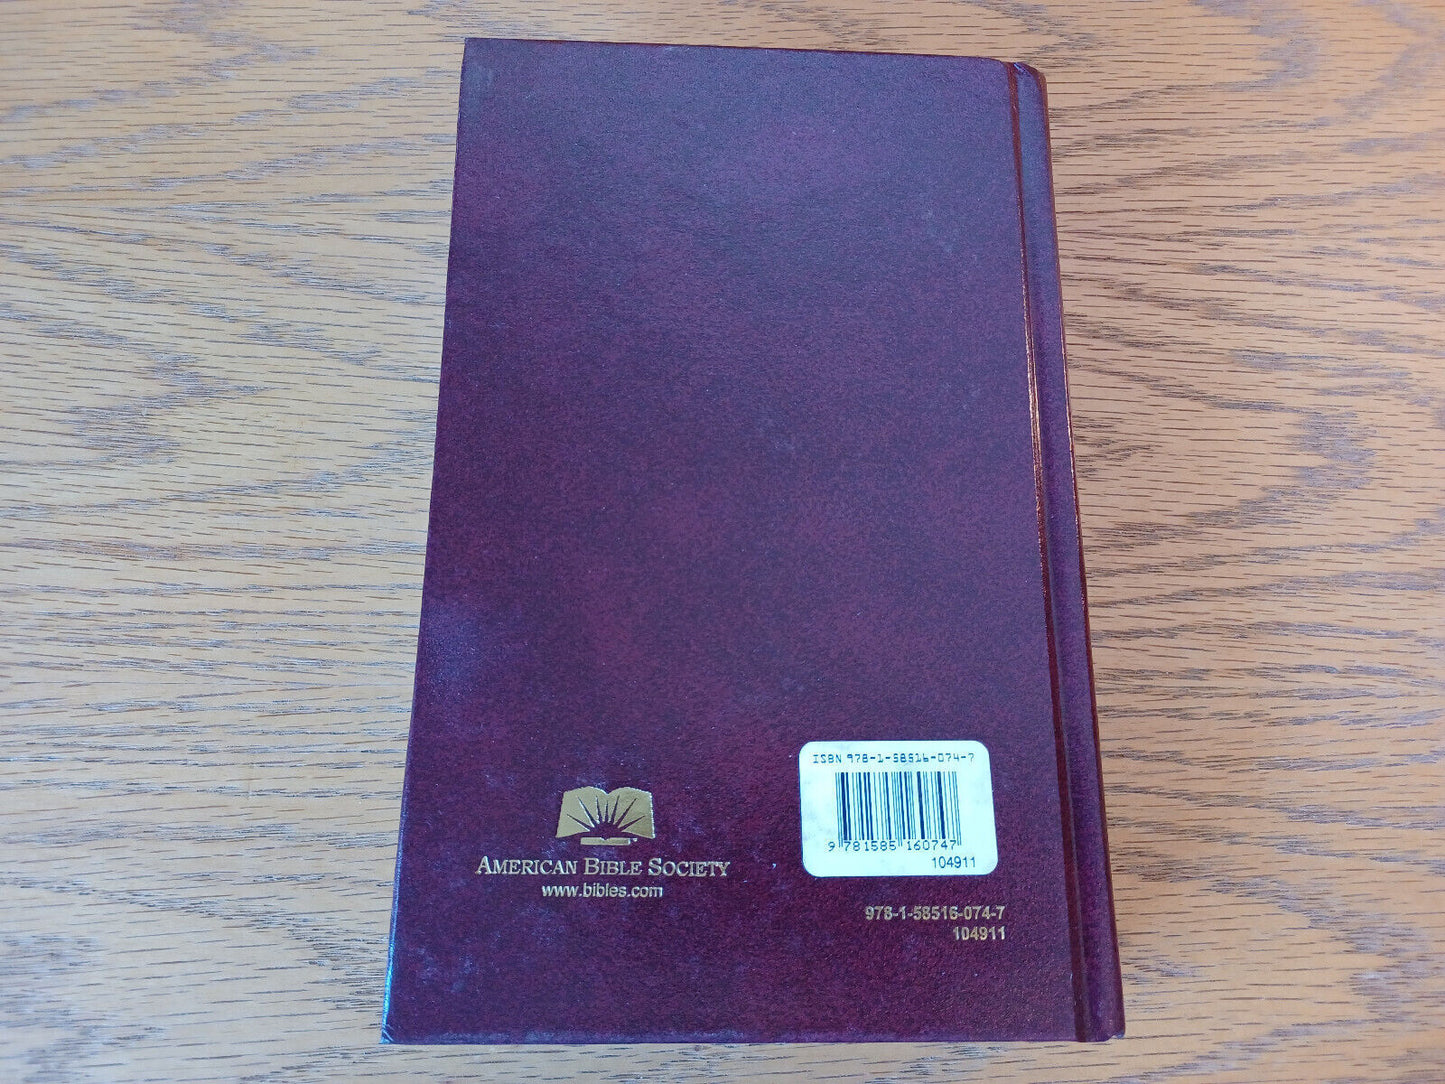 Holy Bible New Revised Standard Version American Bible Society Hardcover O